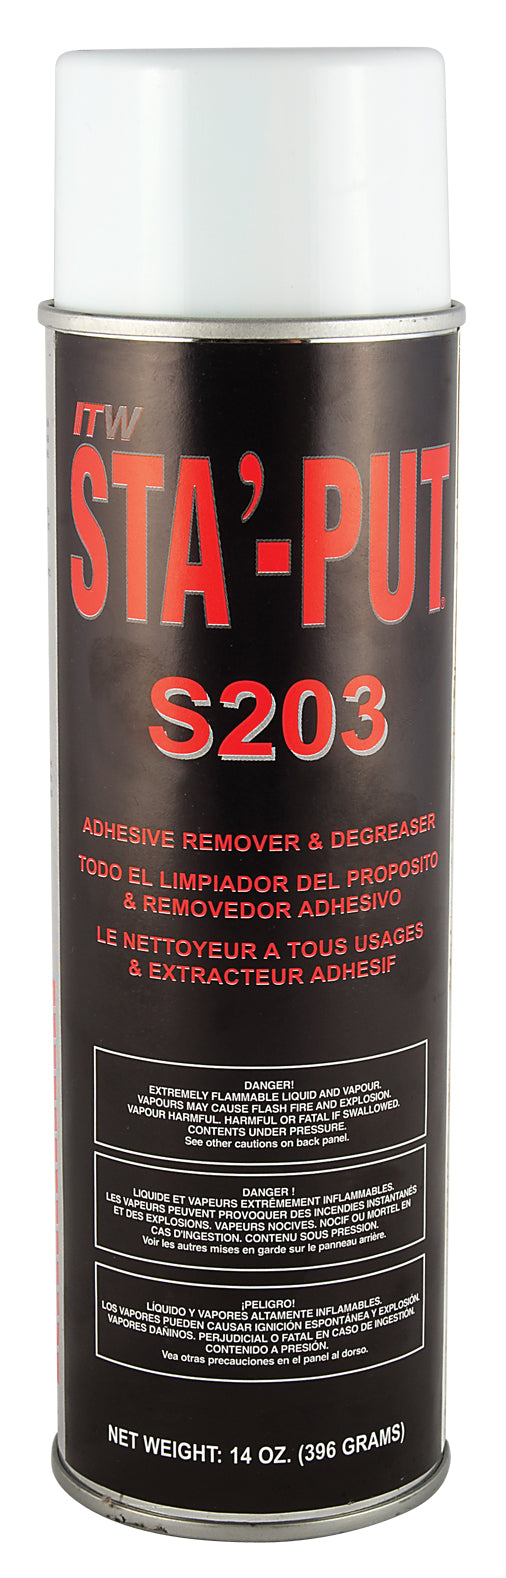 Sta'-Put Adhesive Remover Clear 14 OZ 001-S203